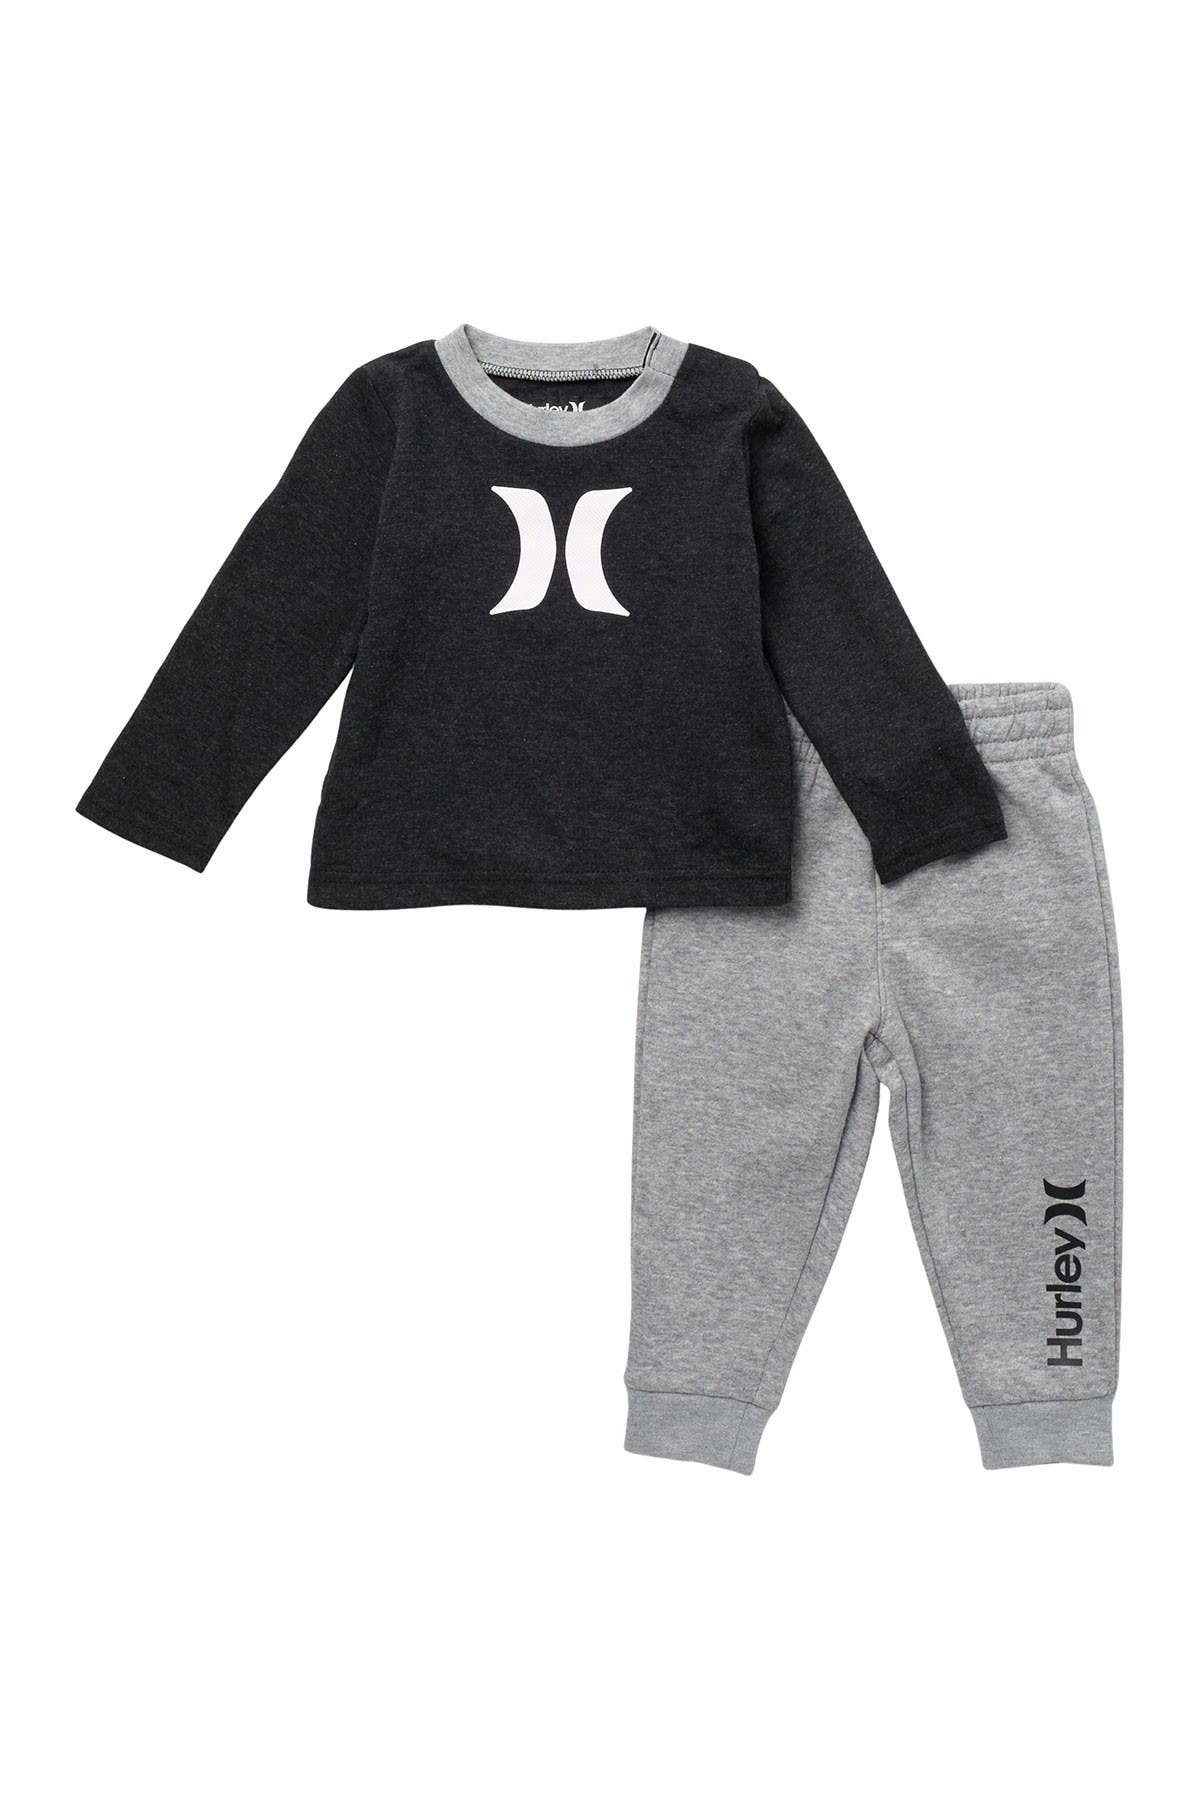 hurley baby clothes